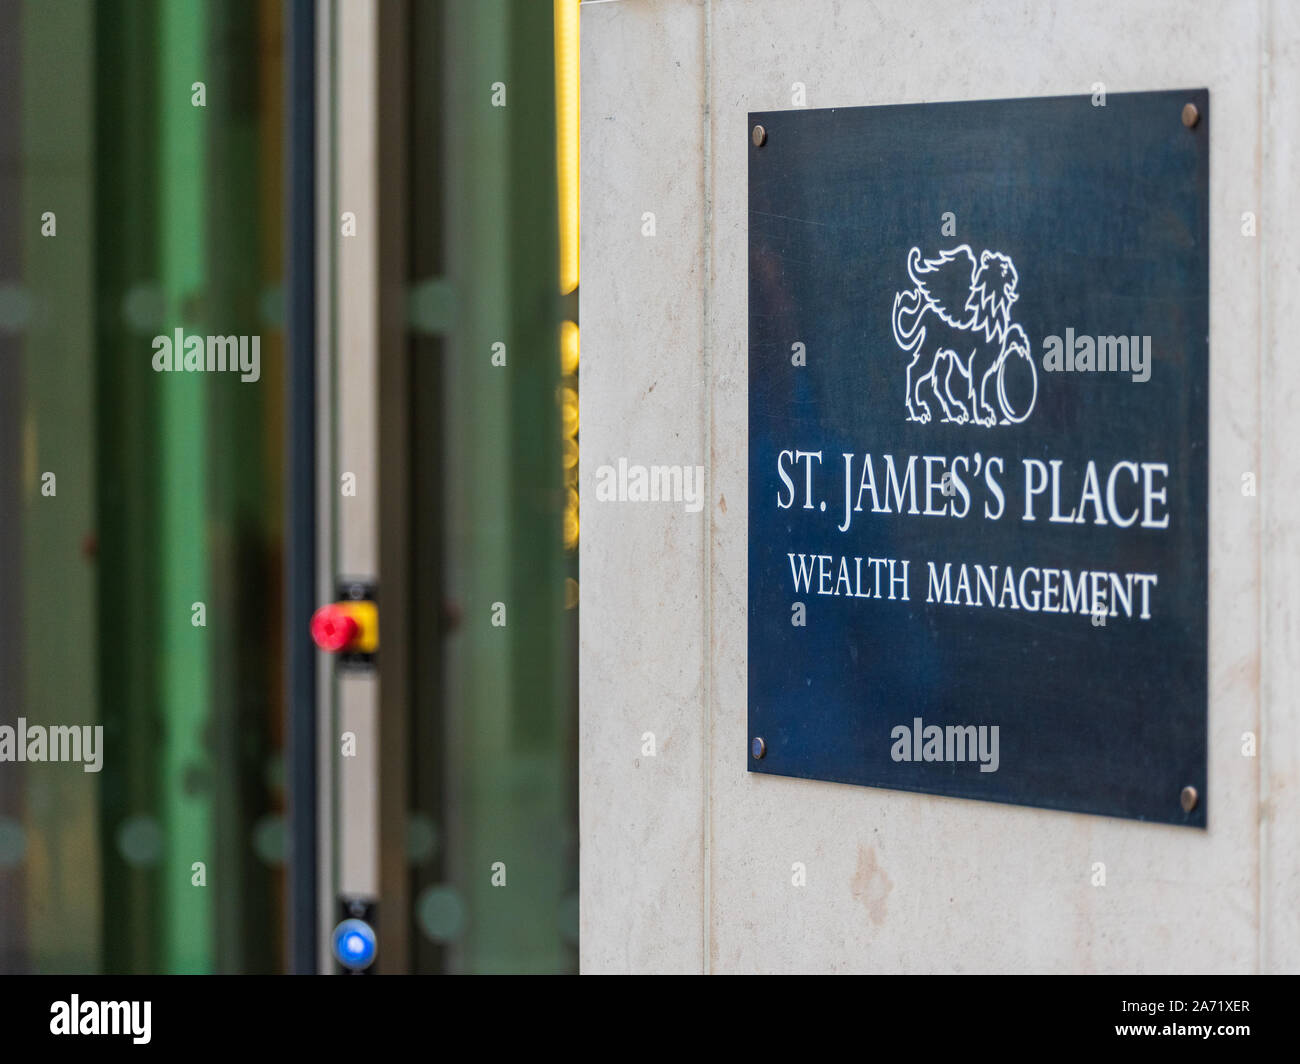 St James's Place London - Wealth Management company in the City of London Financial District. Stock Photo